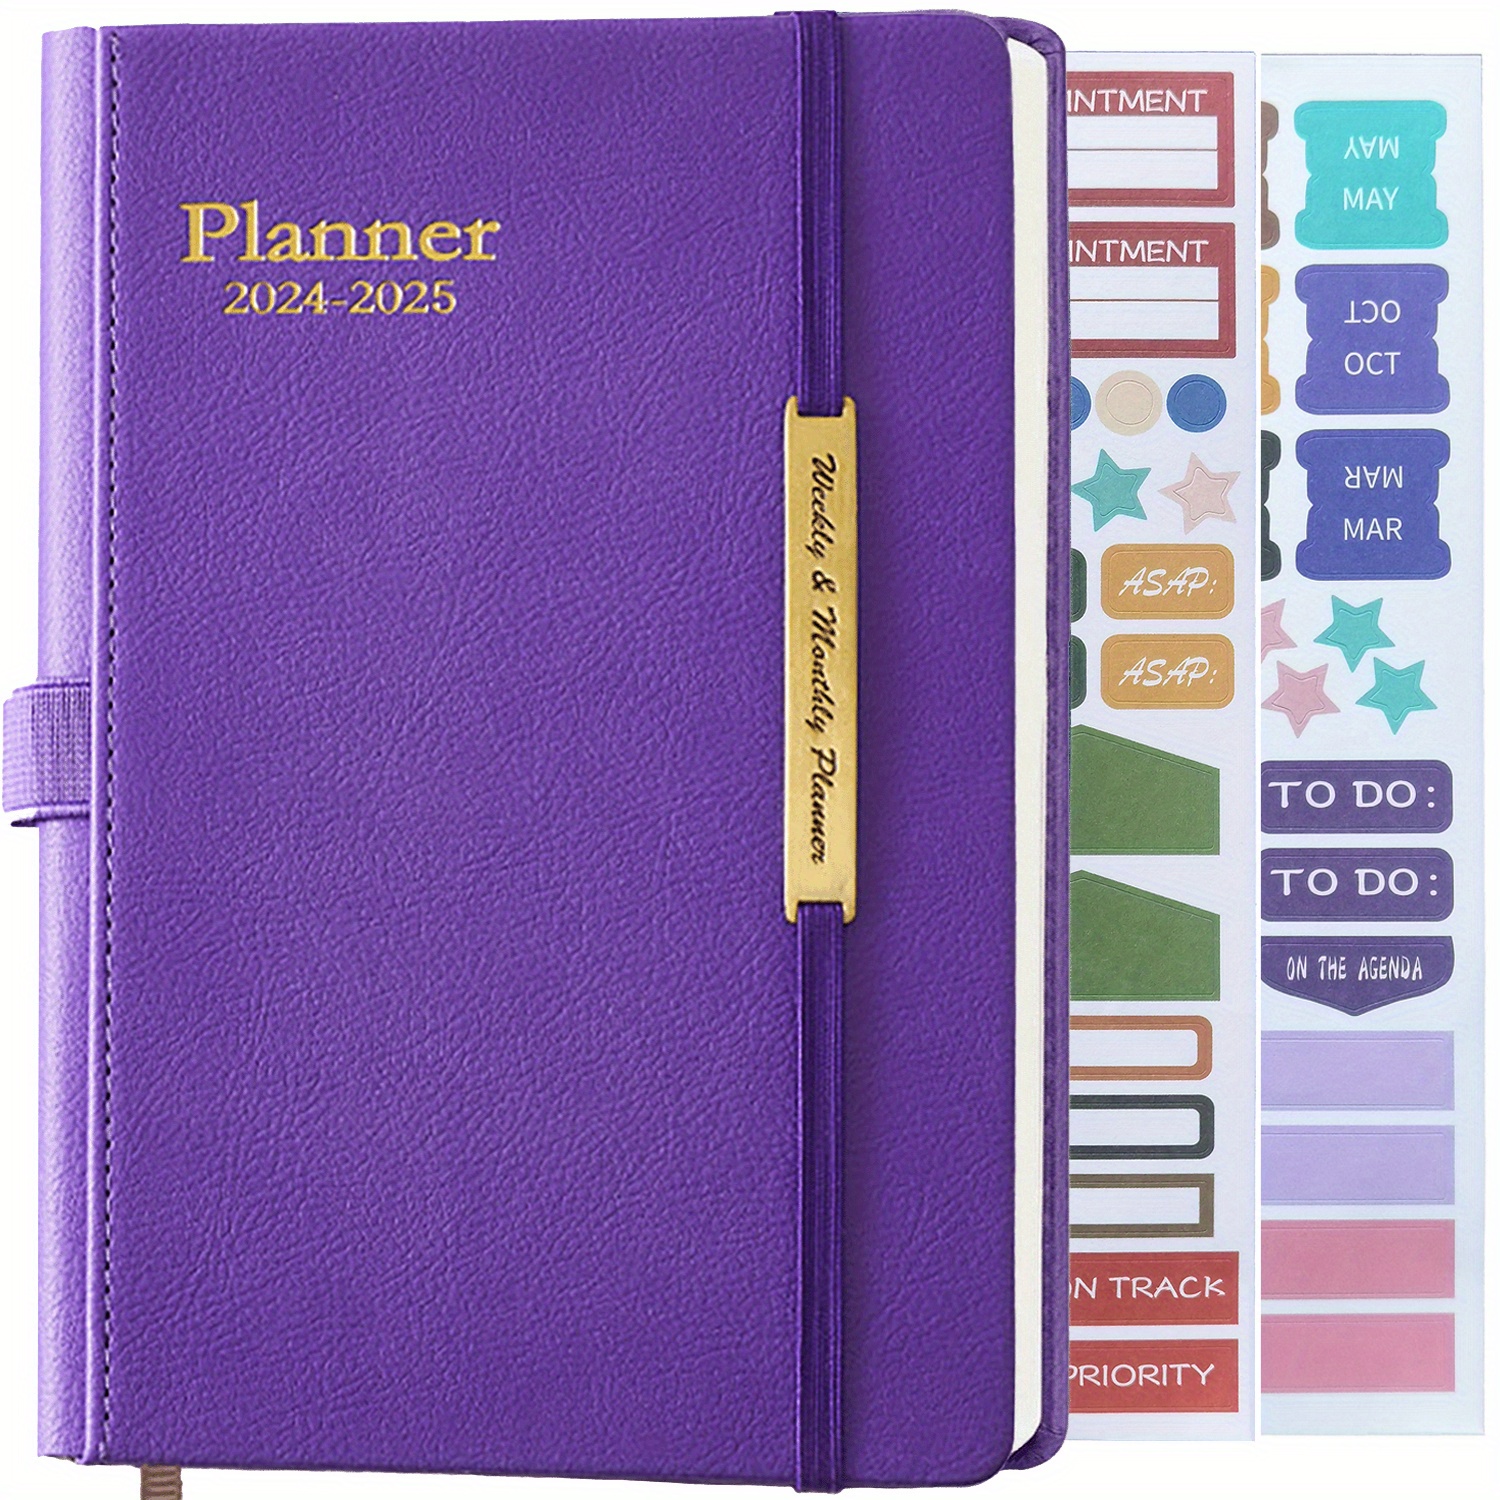 2024-2025 Planner 18 Months Daily Weekly And Monthly Planners, A5 Hardcover  Agenda Journal Notebook Planner With Stickers For Students, Teachers, Men